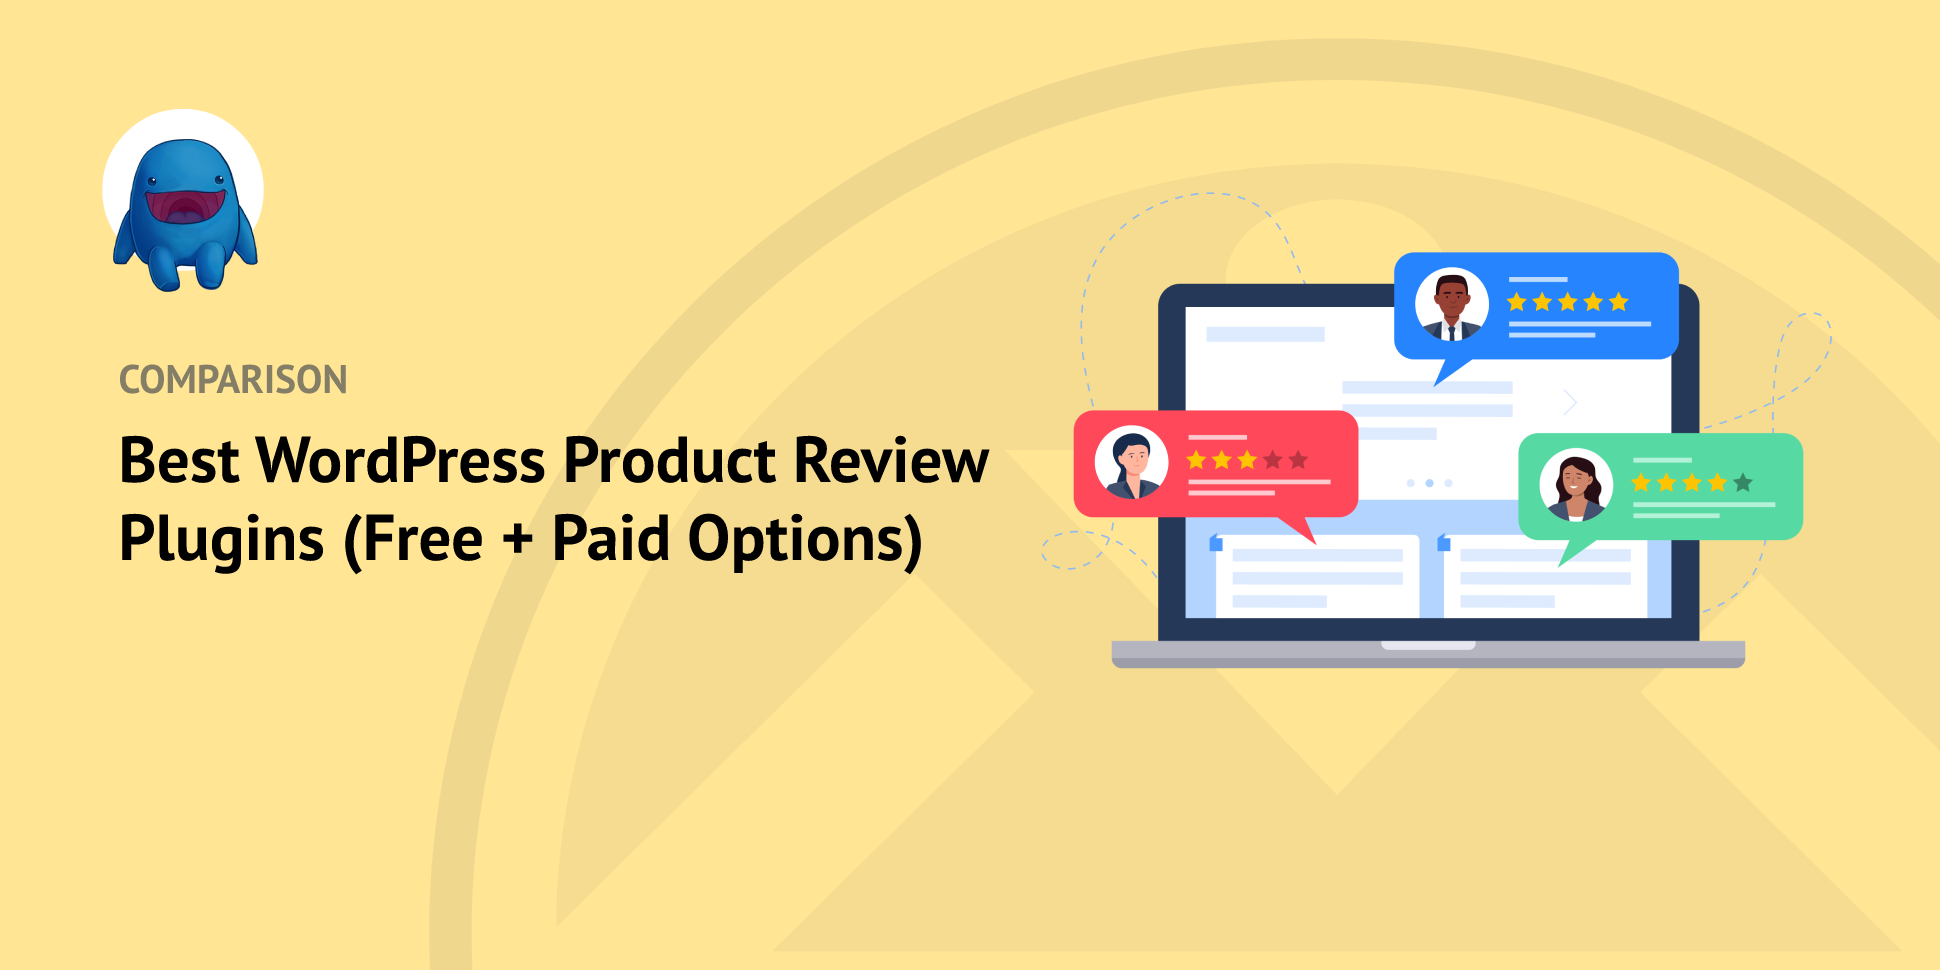 Best WordPress Product Review Plugins (Compared)